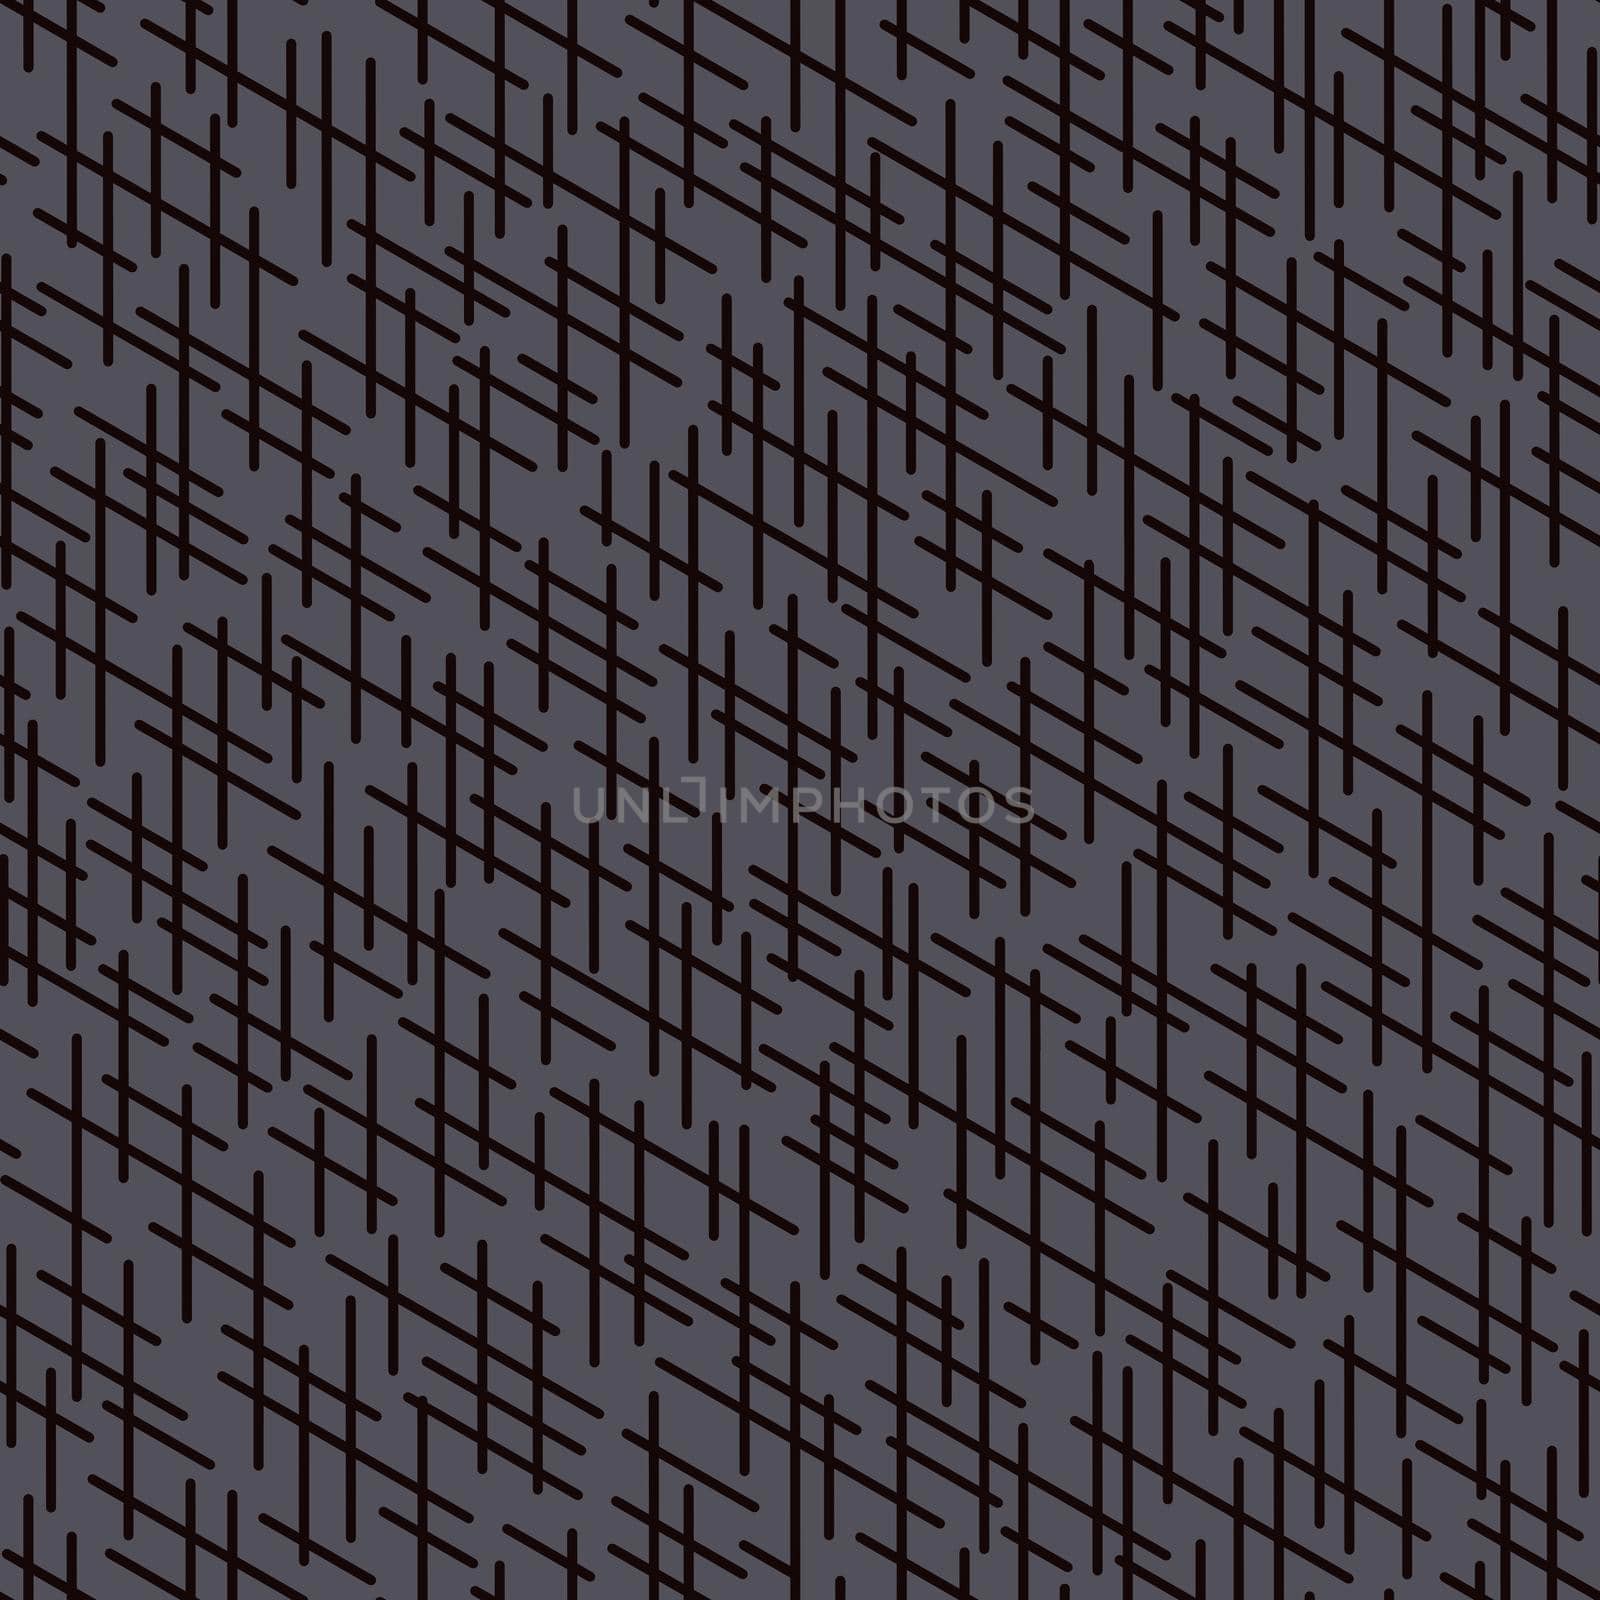 Randomly crossing lines making pattern.Chaotic short lines seamless pattern,chips and sticks modern repeatable motif.Good for print, textile,fabric, background, wrapping paper.Gray black colors.